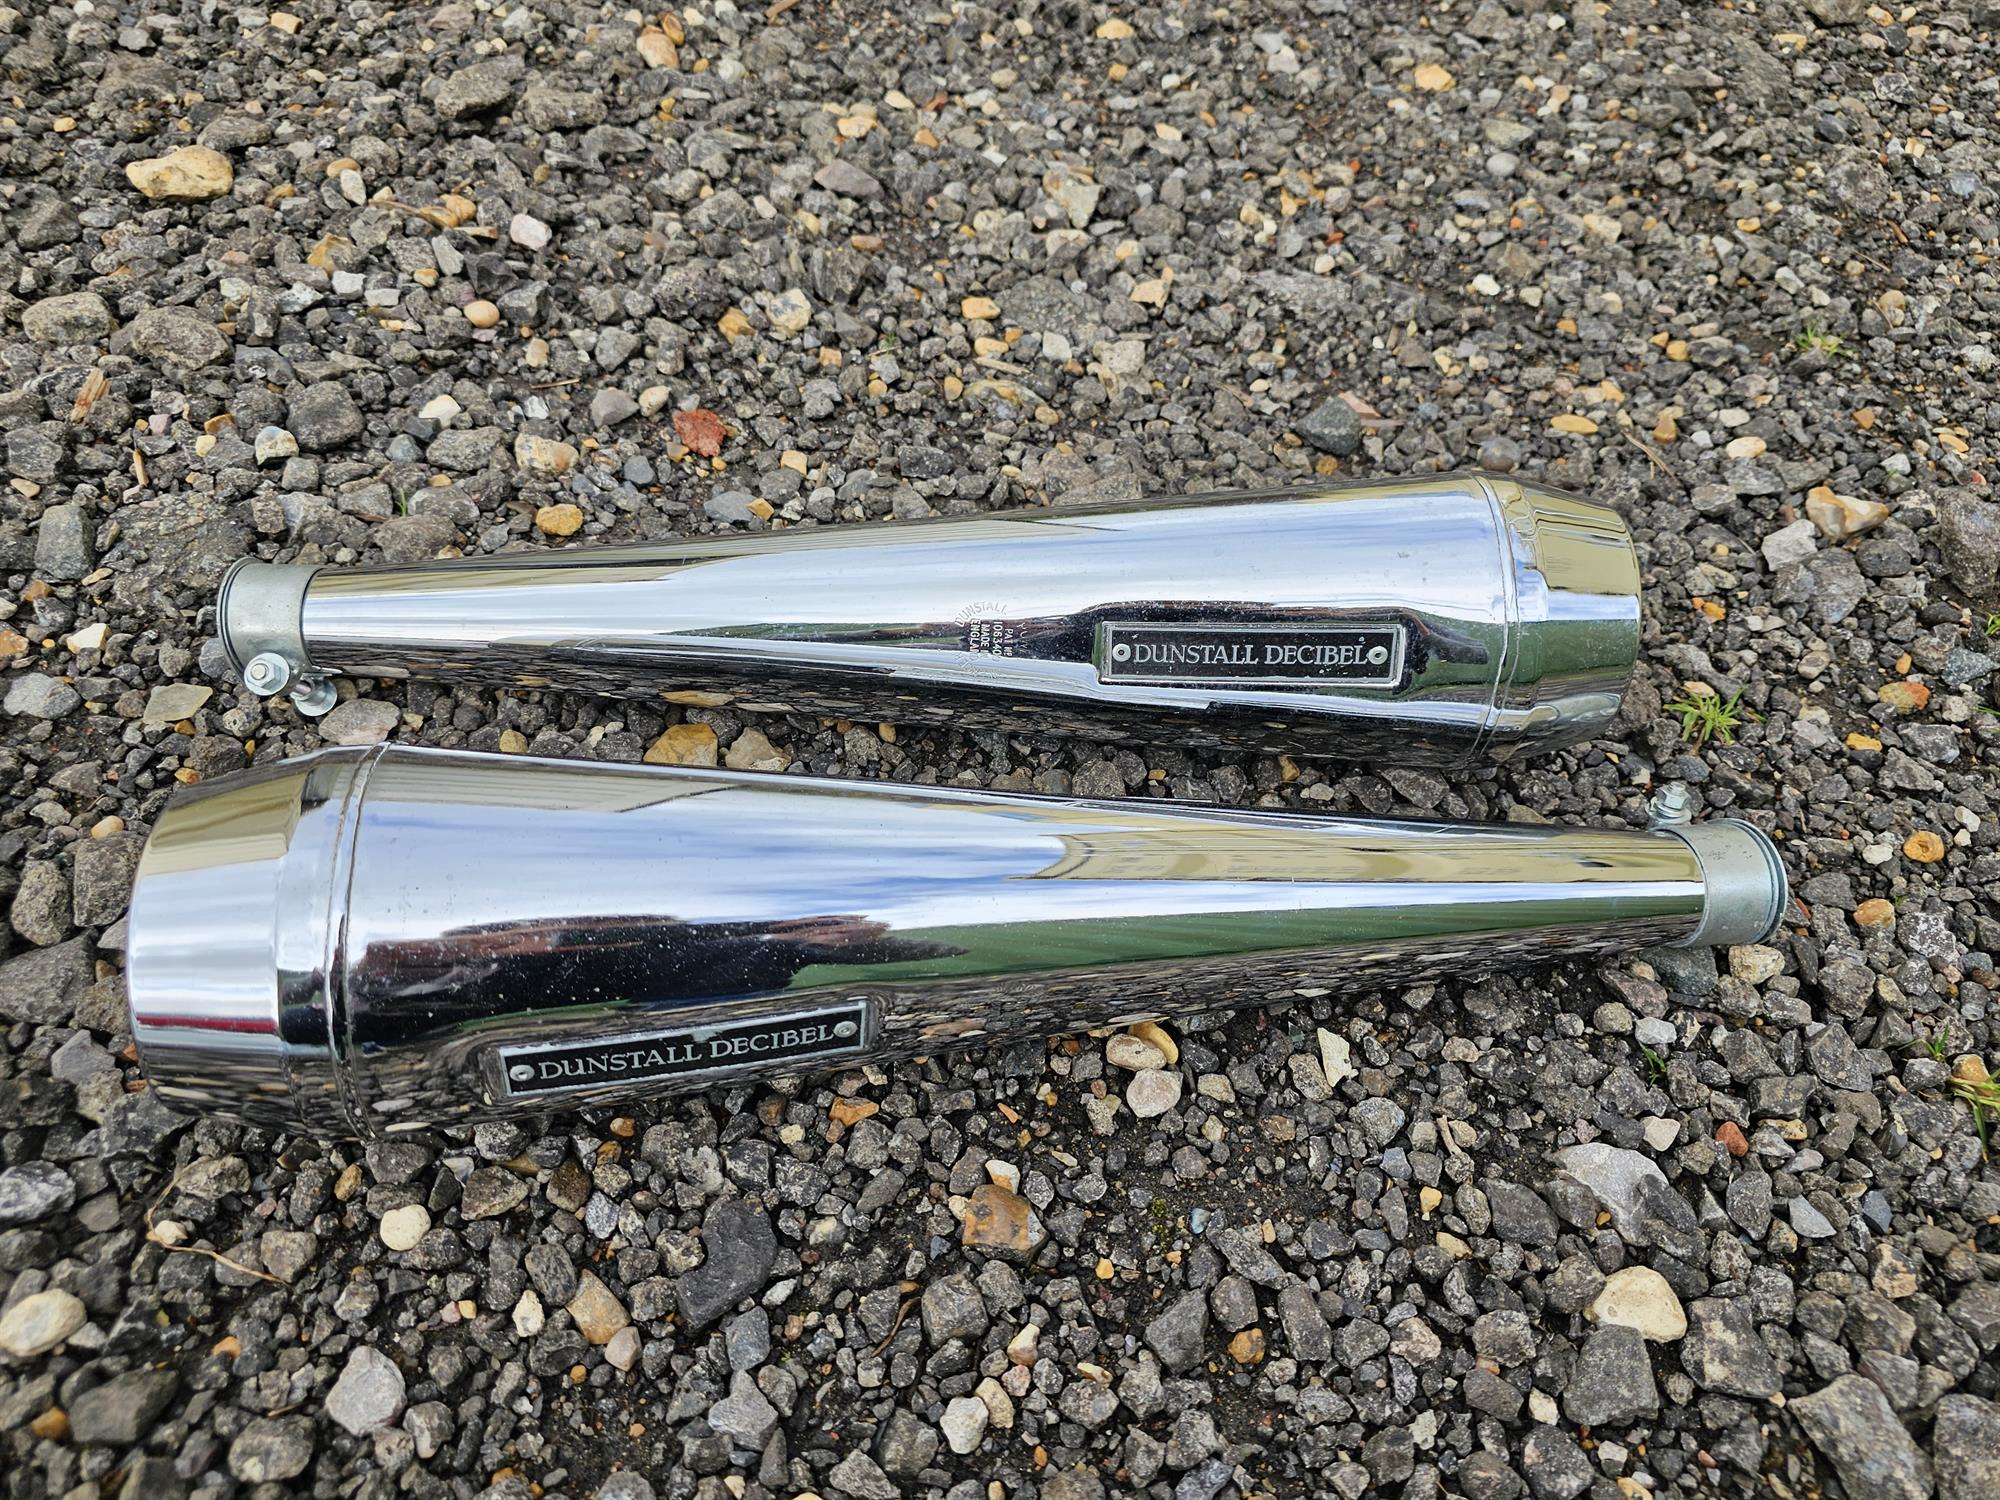 Dunstall Decibel chrome plated Motor Cycle exhausts(2) and other car/motor cycle parts.